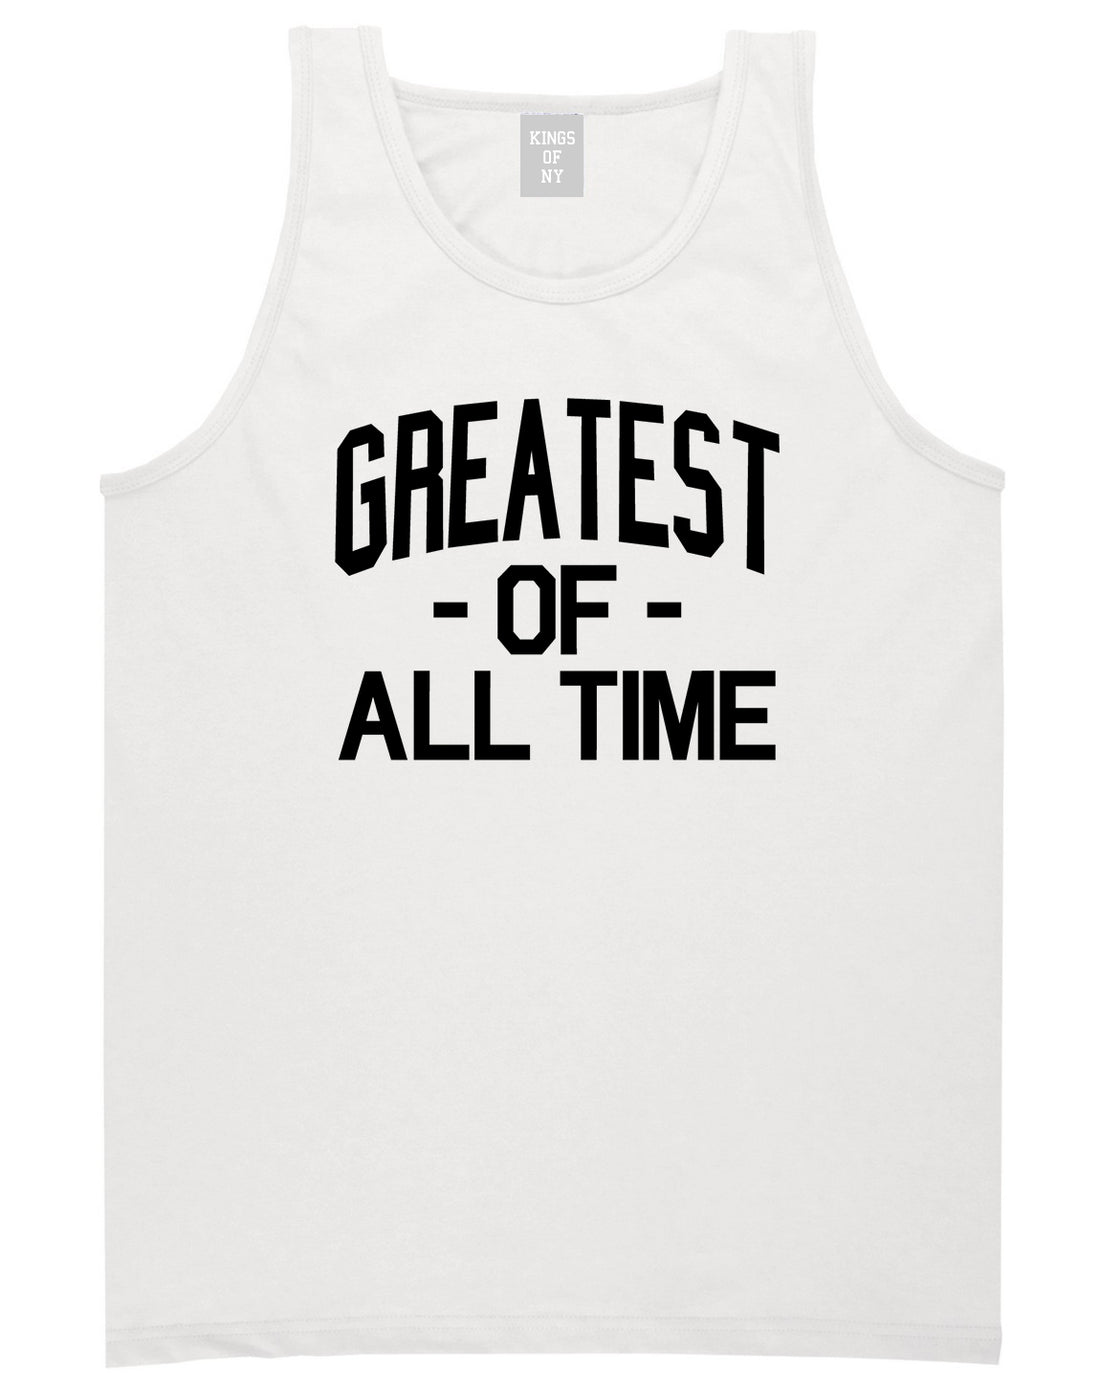 Greatest Of All Time GOAT Mens Tank Top Shirt White by Kings Of NY